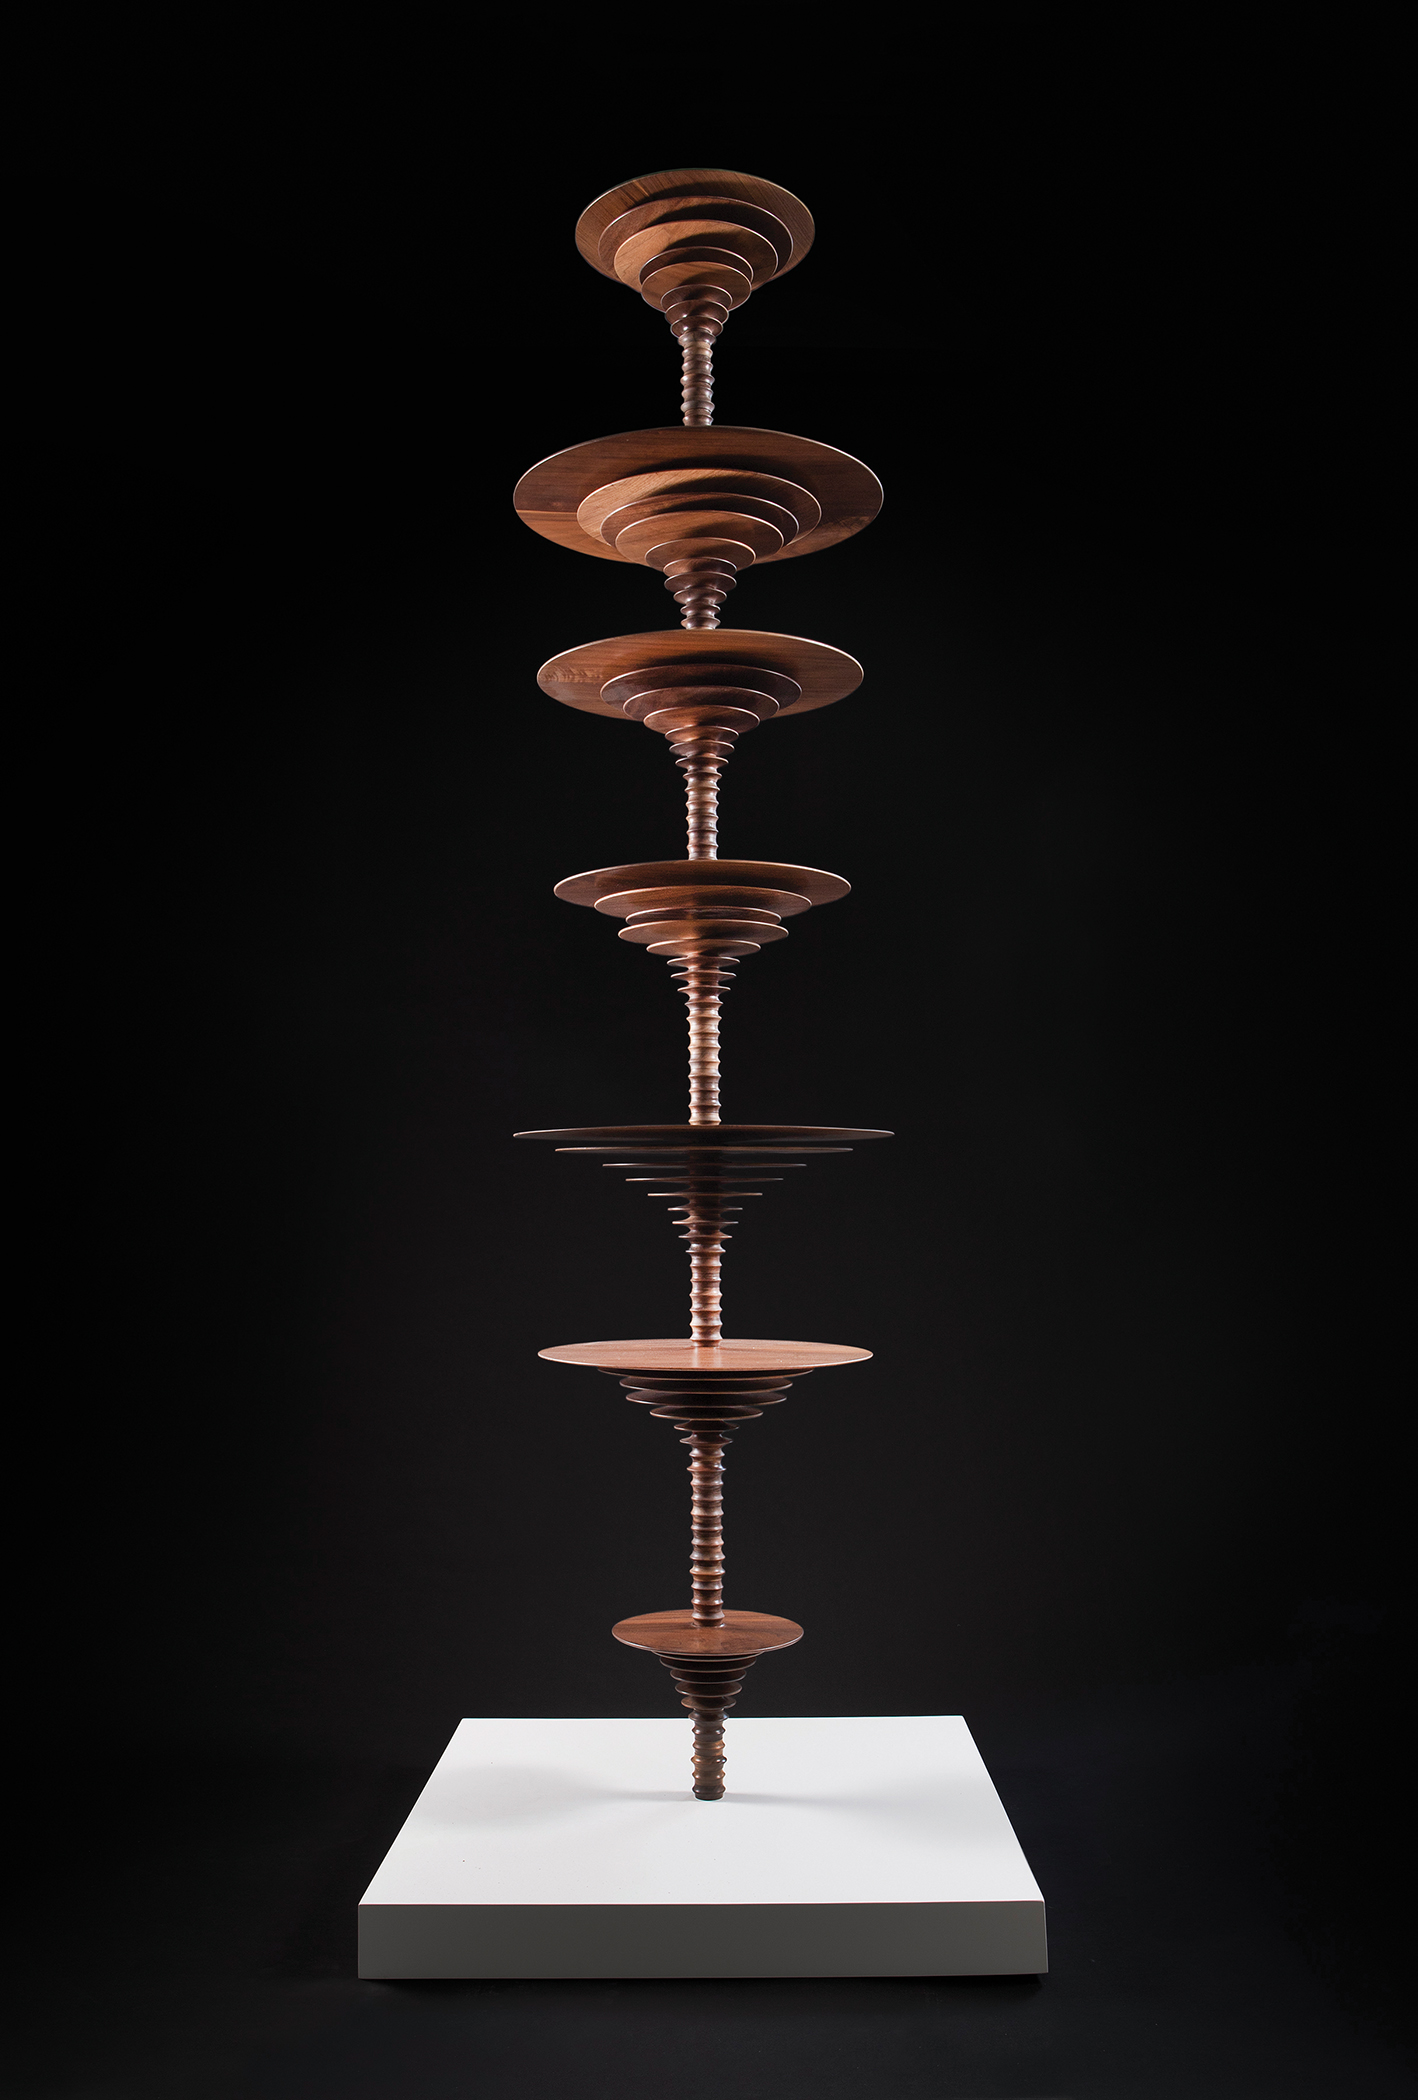 Seven wooden discs of varying sizes are arranged vertically on a wooden column, resting on a white square base